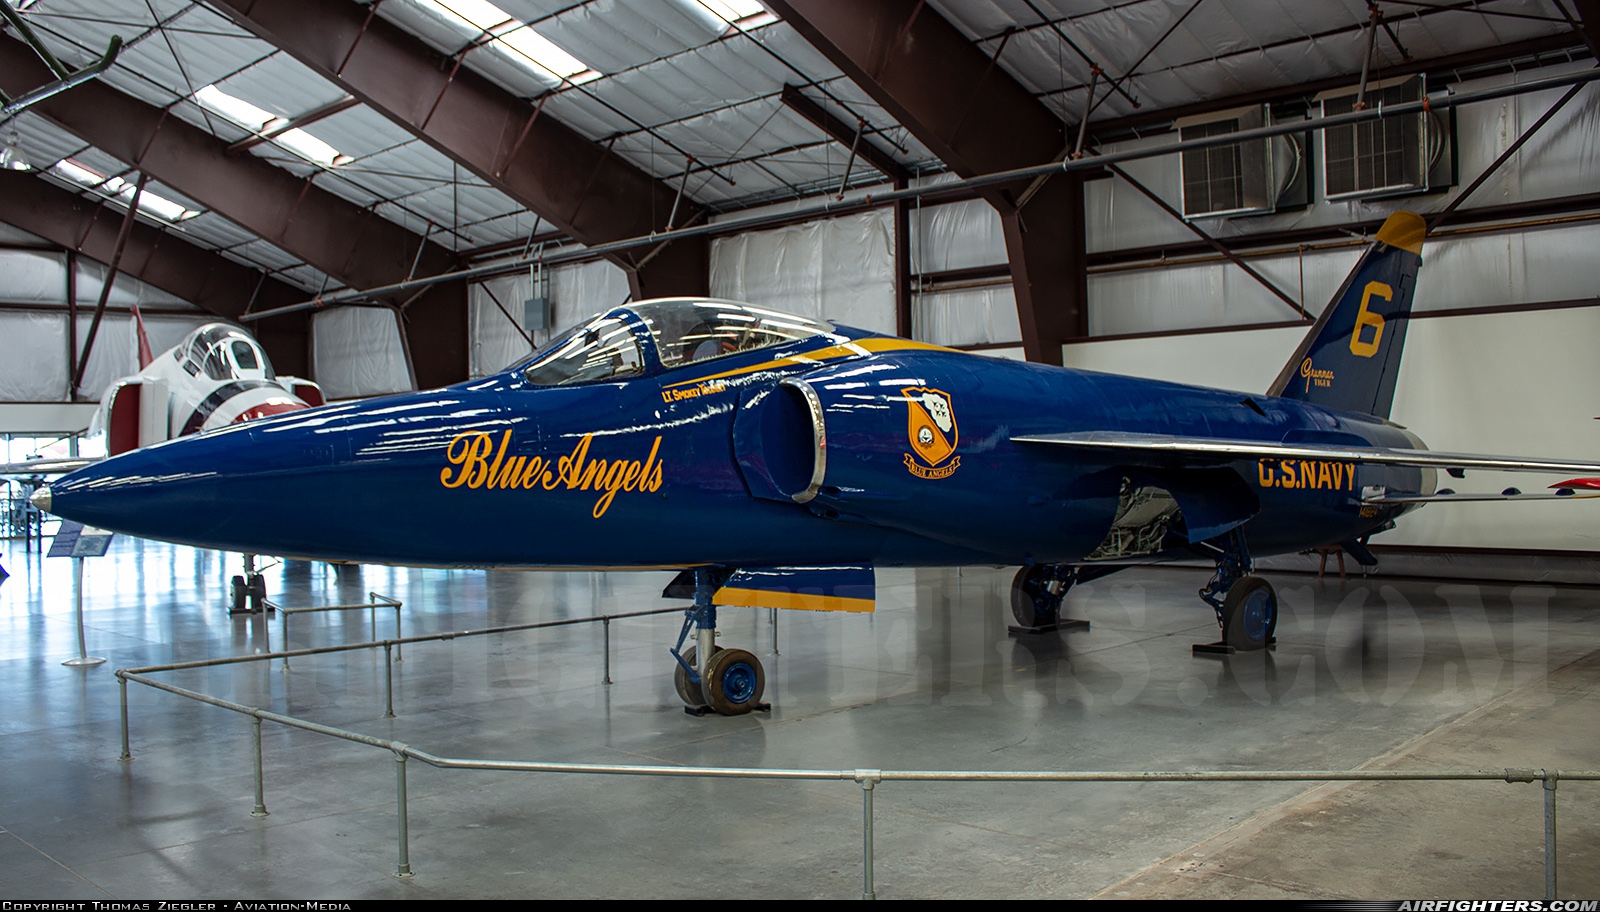 USA - Navy Grumman F11F-1 Tiger 141824 at Tucson - Pima Air and Space Museum, USA